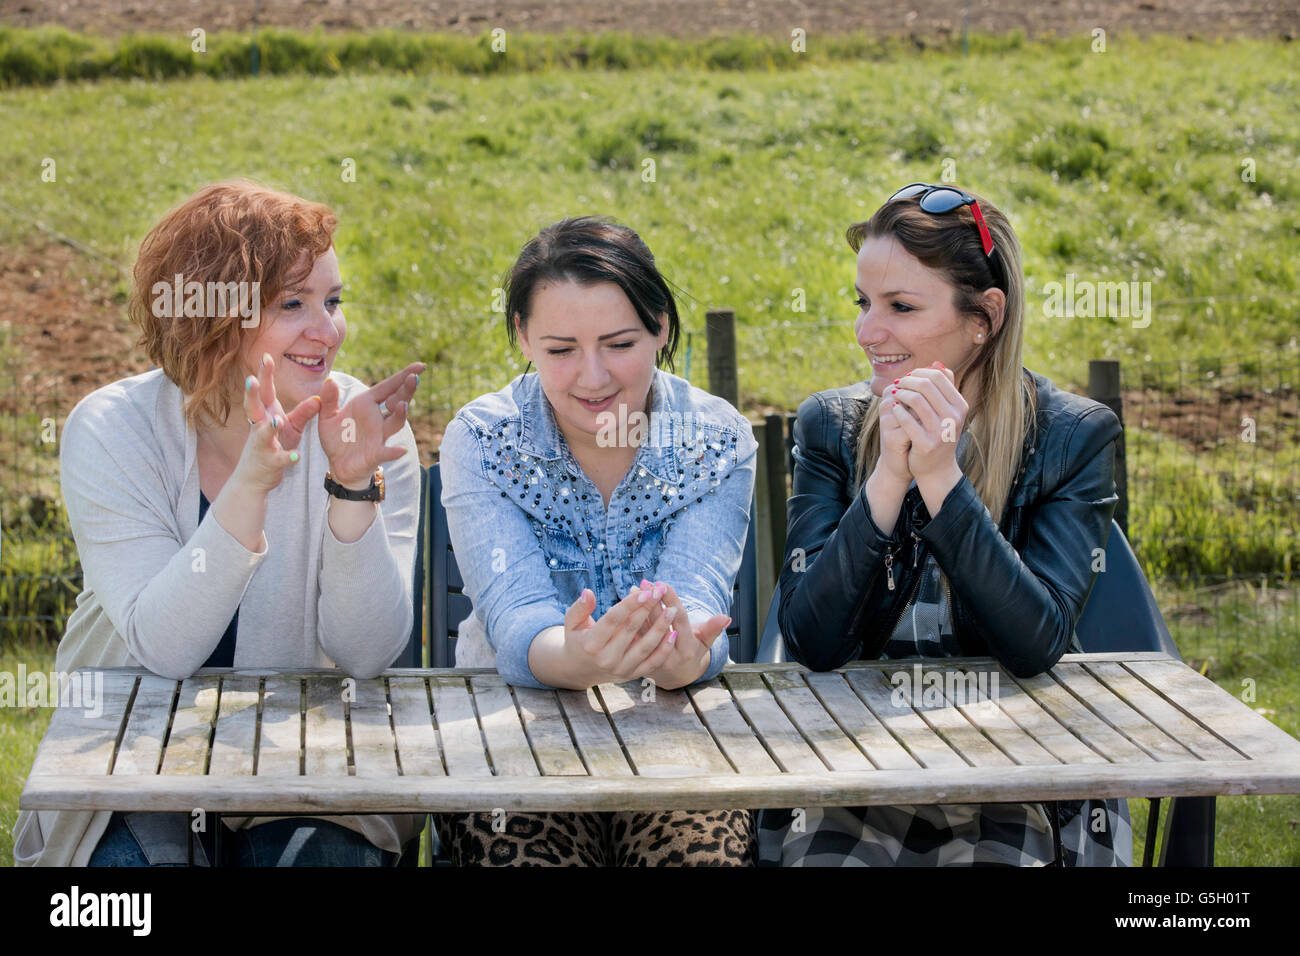 Happy women gather and chat at picnic table outside in meadow land Stock Photo